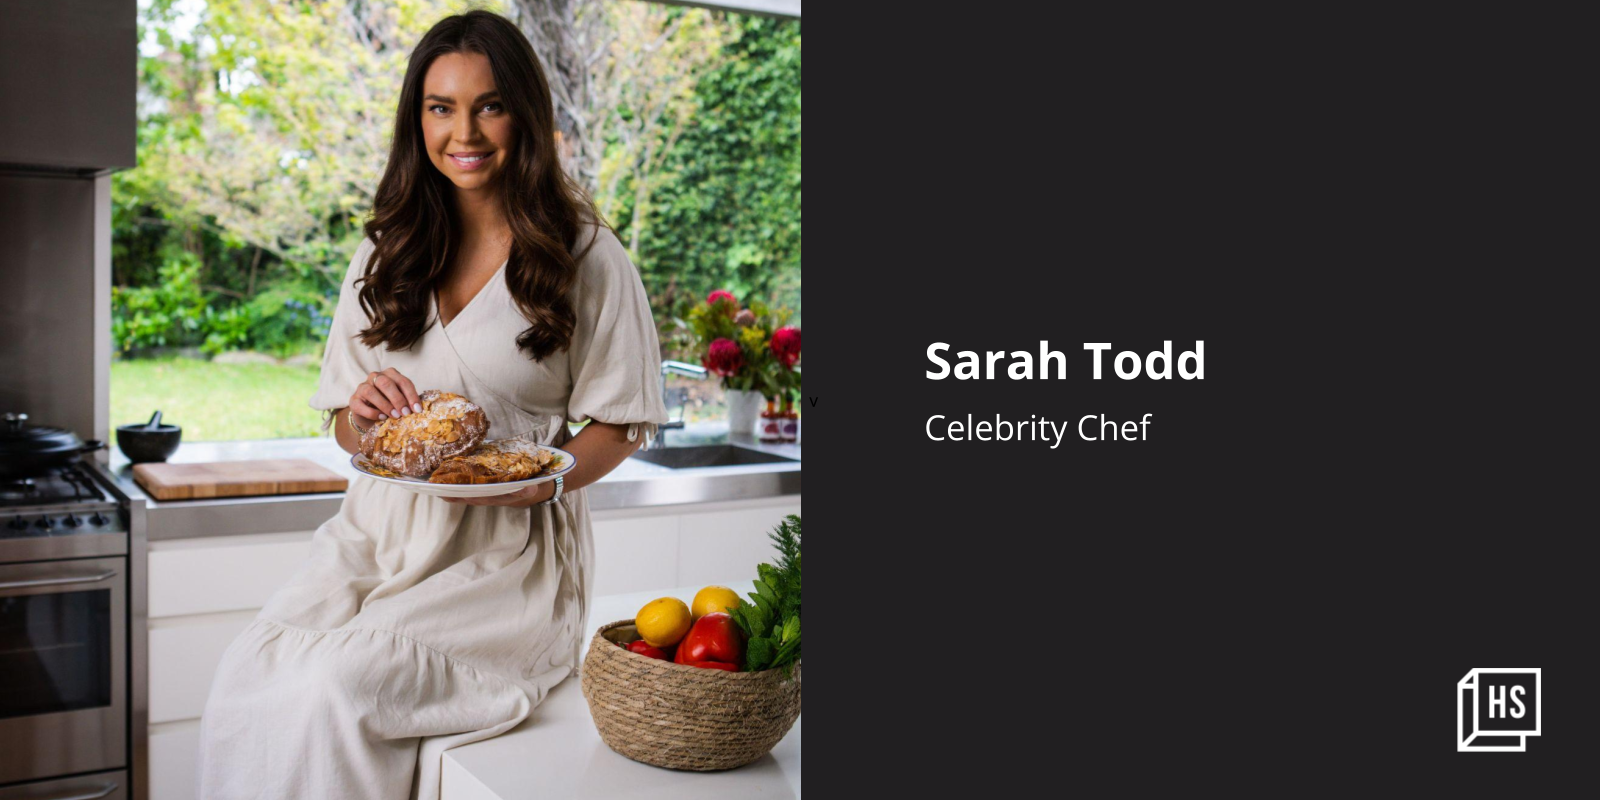 Celeb chef Sarah Todd on her return to MasterChef, Indian flavours, and her new spice line

